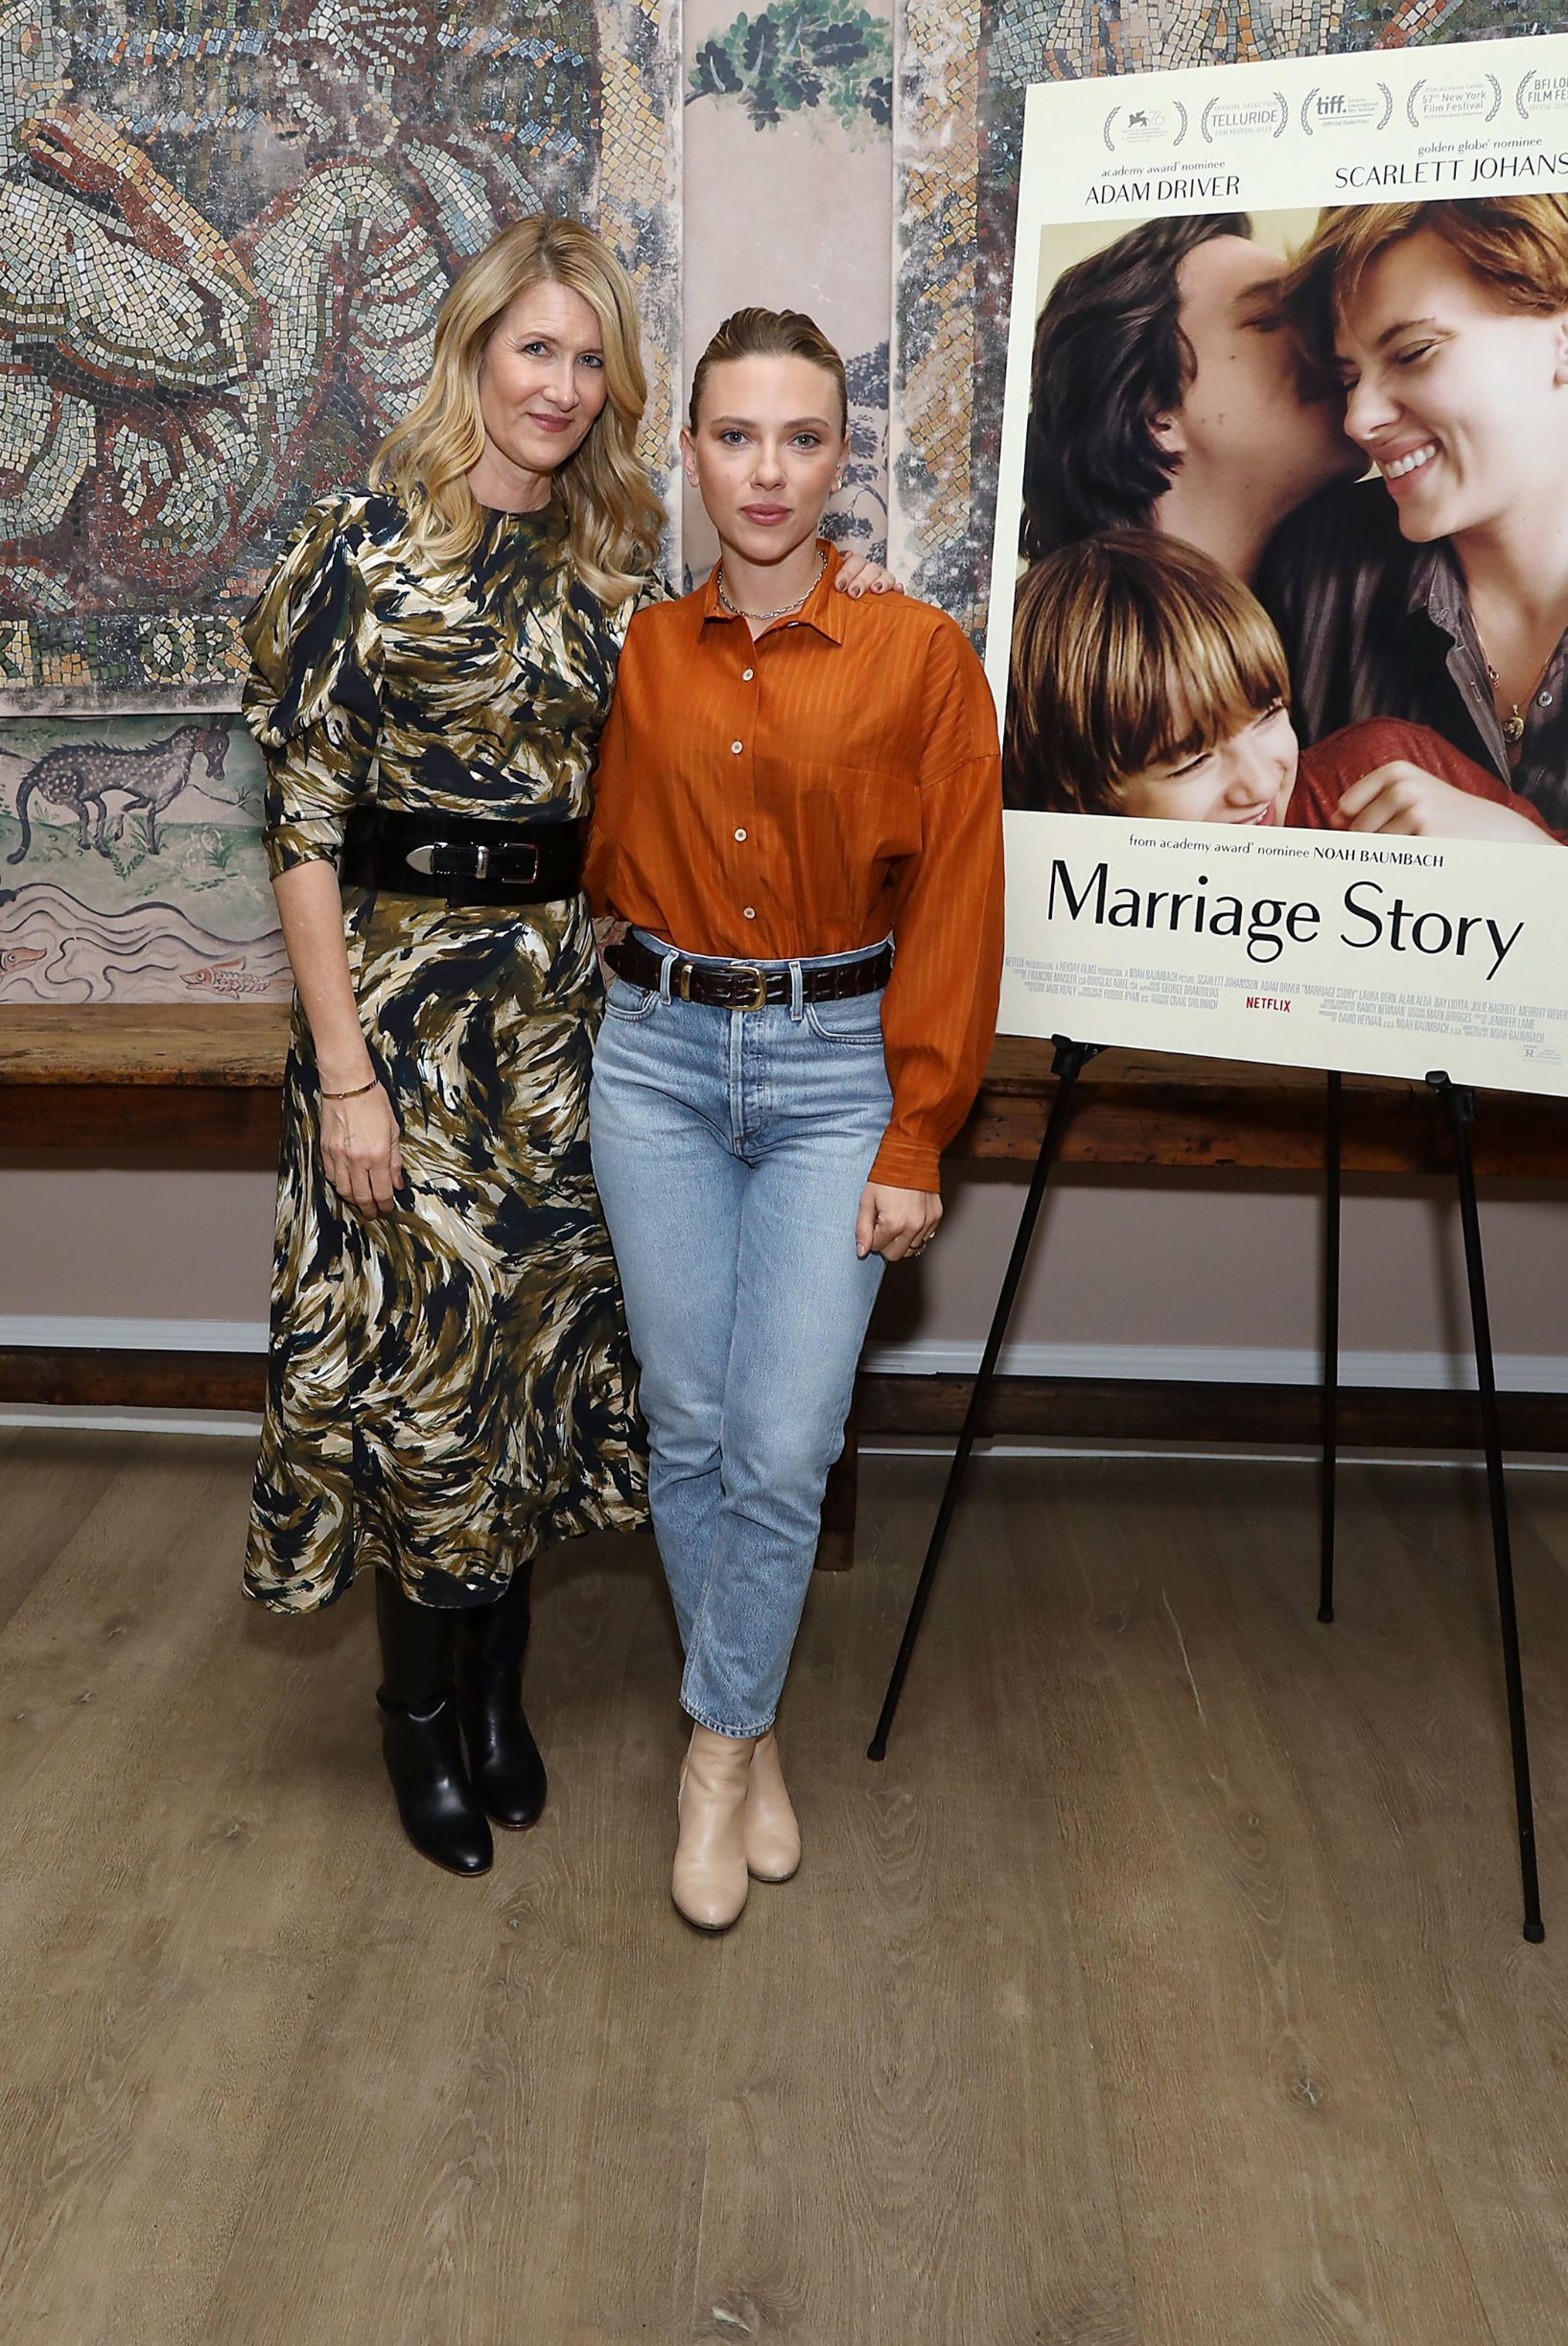 Laura Dern, Scarlett Johansson
NY Special Screening and Q and A for 